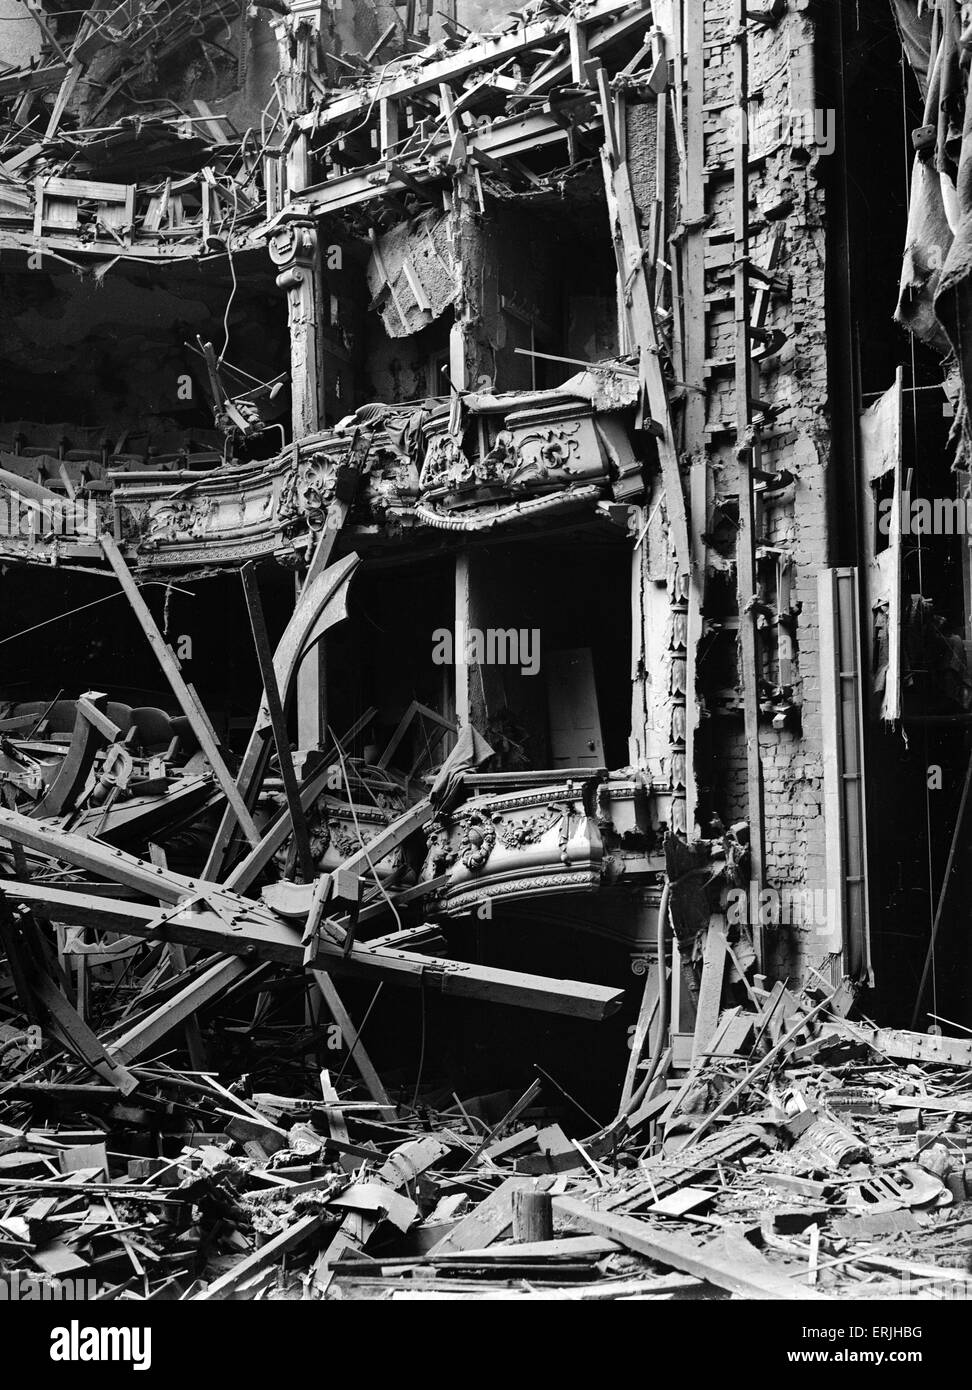 The Prince of Wales Theatre, Broad Street, Birmingham,  was a casualty of one of the first air raids over Birmingham when it took a direct hit on the 9th of April 1941, completely destroying the auditorium and interior. Pictured 10th April 1941. Stock Photo